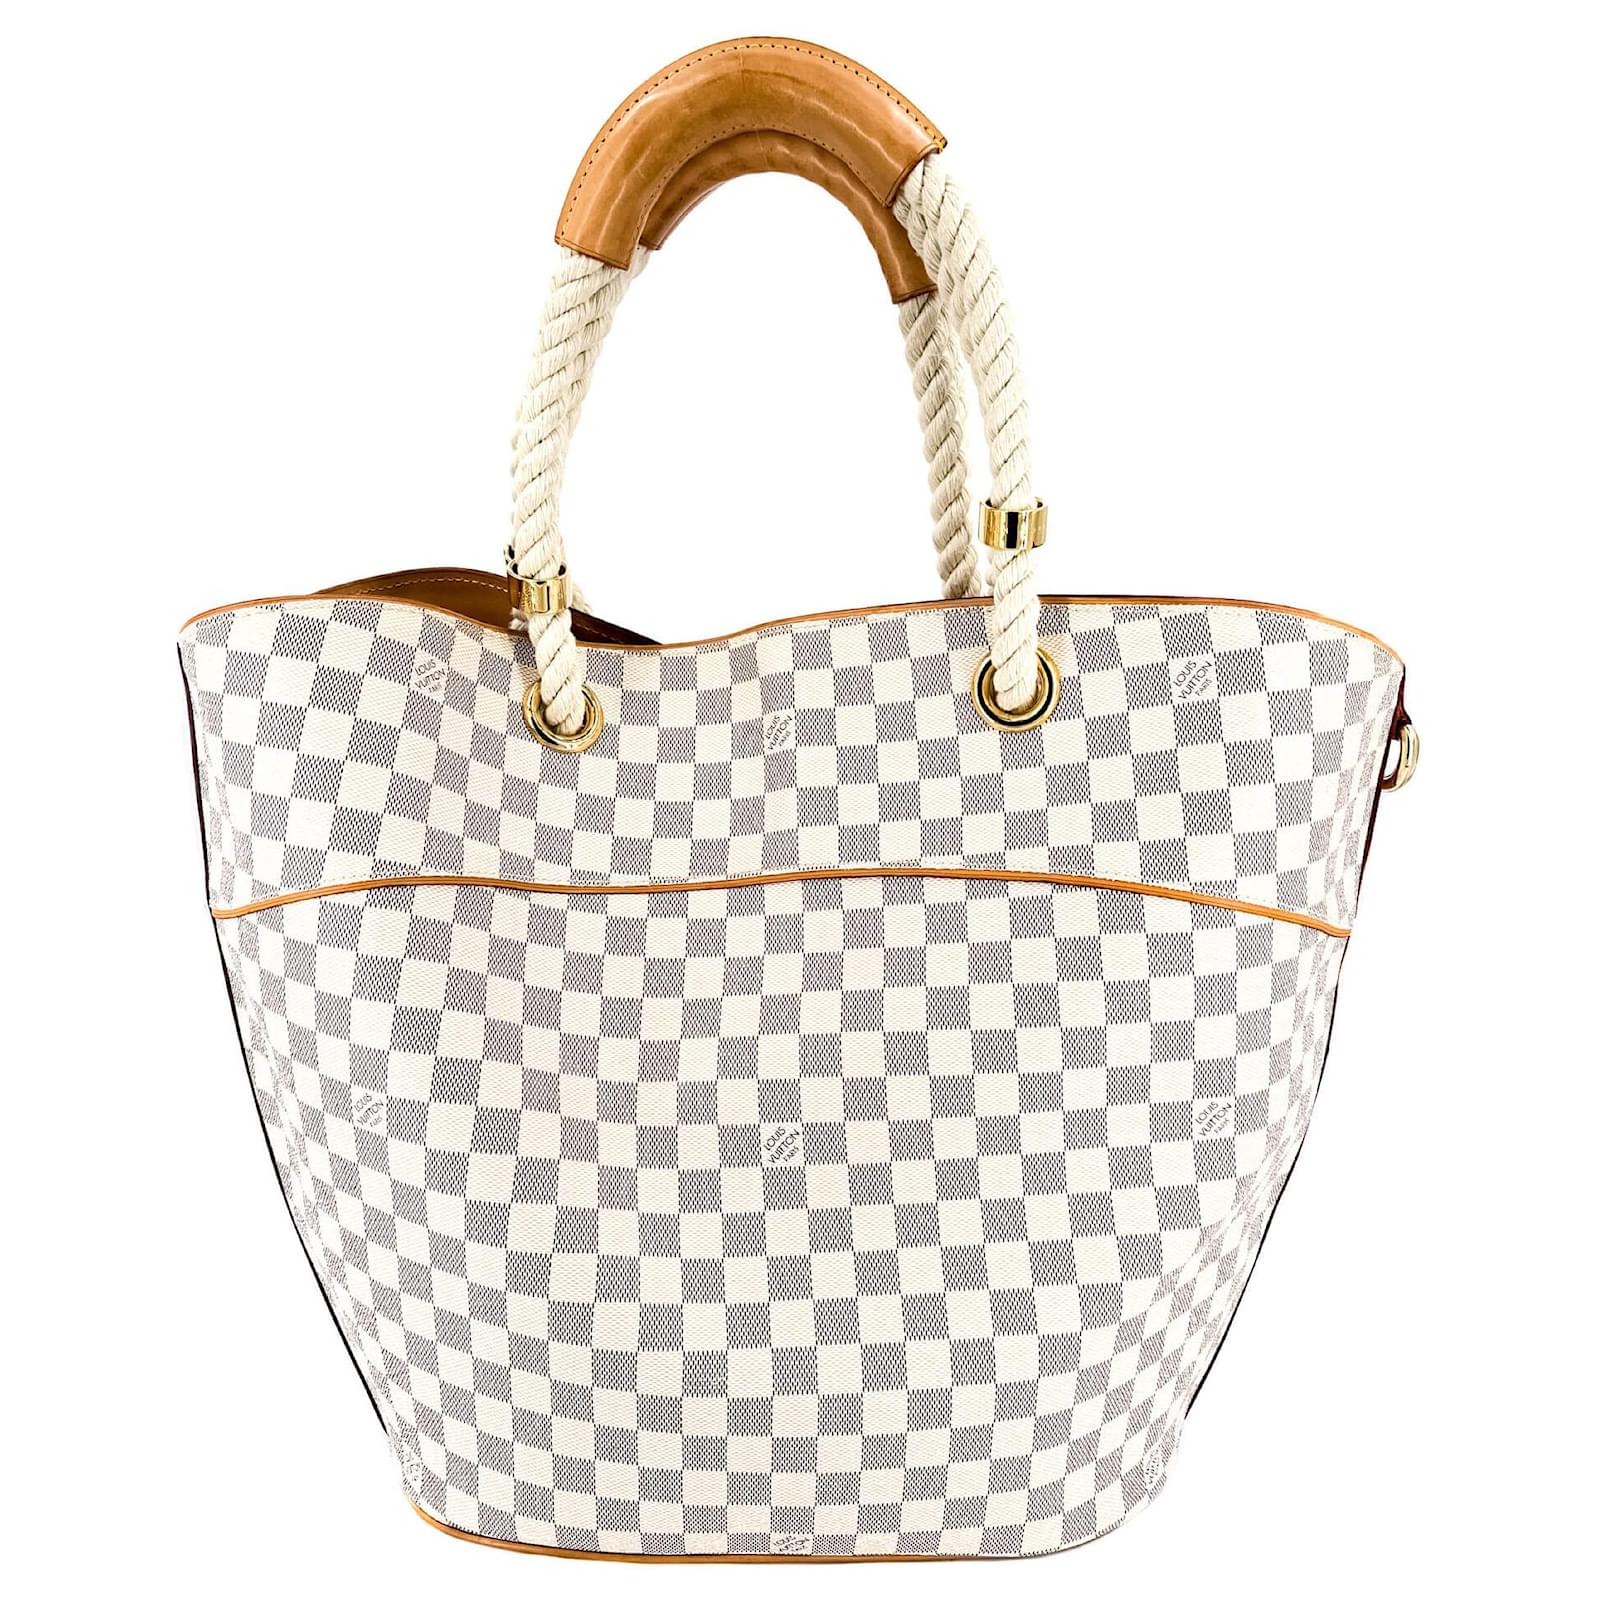 gently used louis vuitton bags